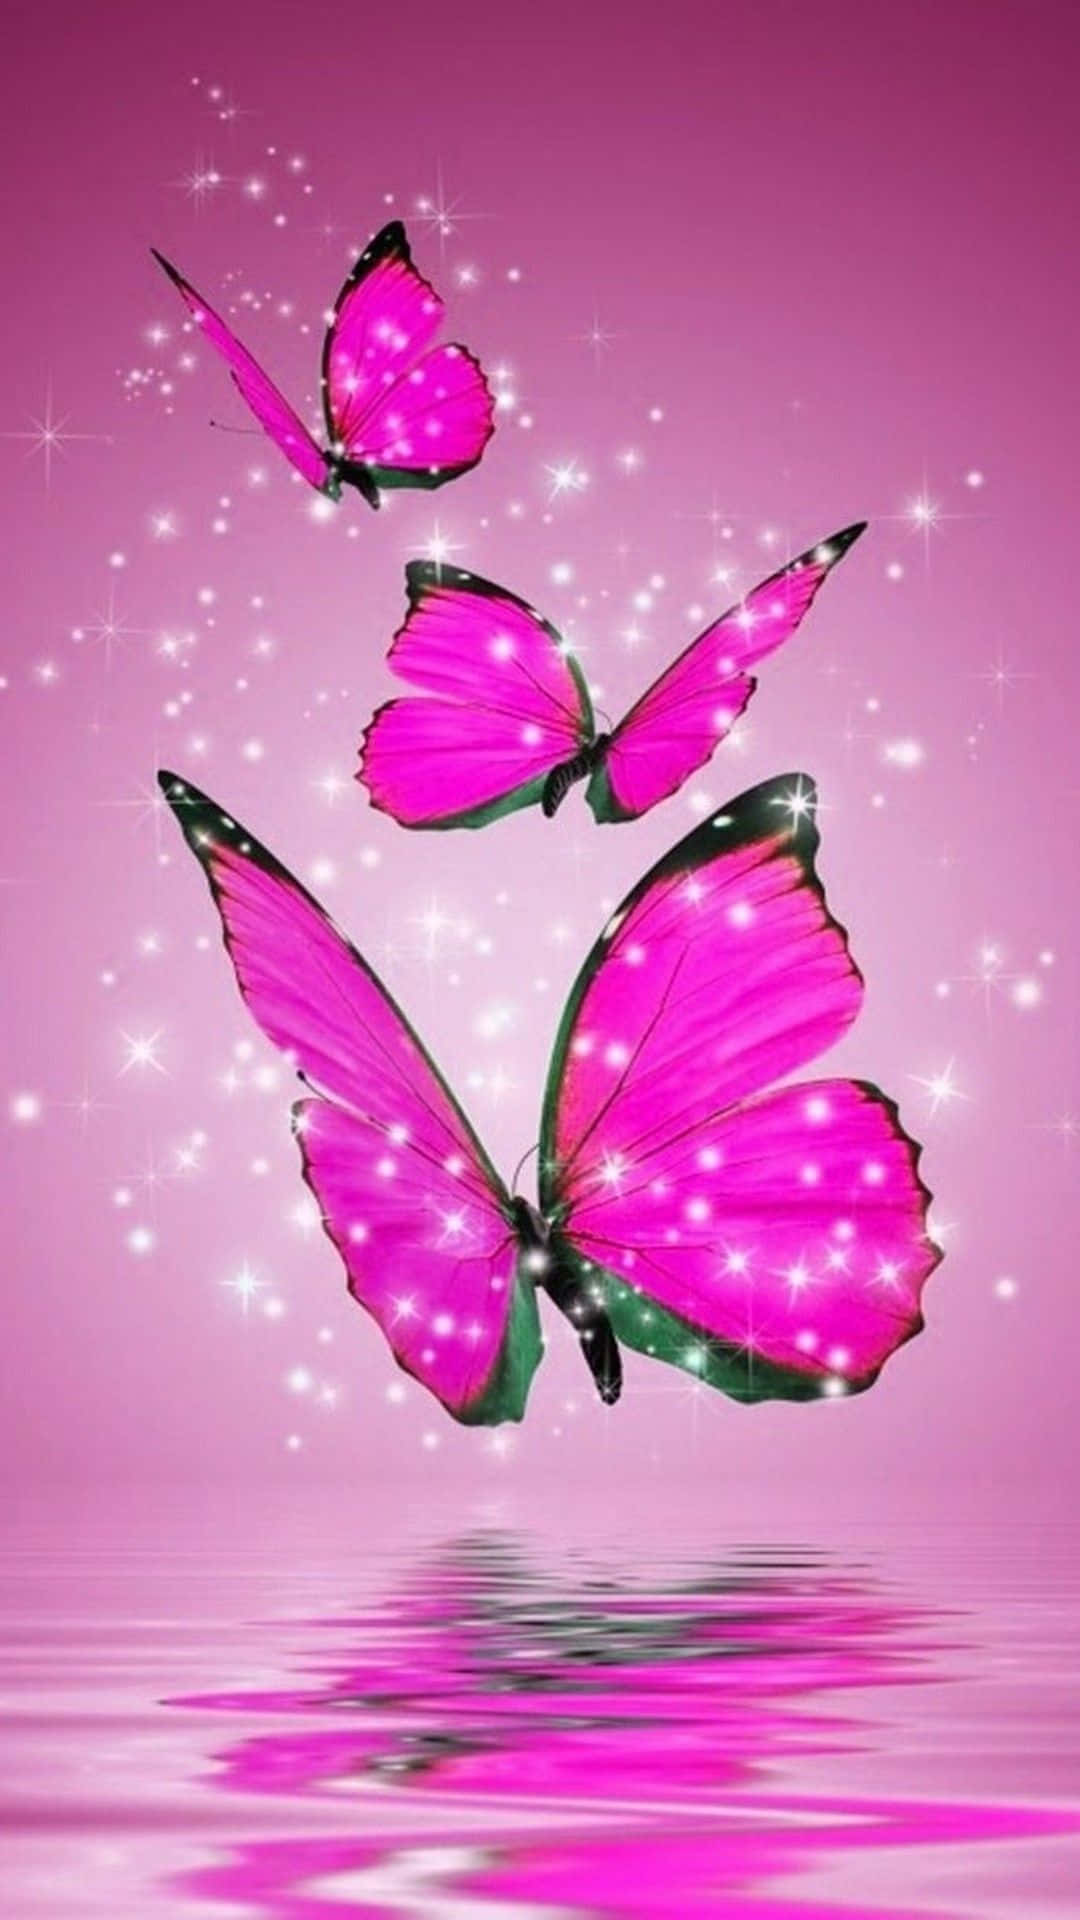 A magical glitter butterfly with exquisite wings and coloring Wallpaper